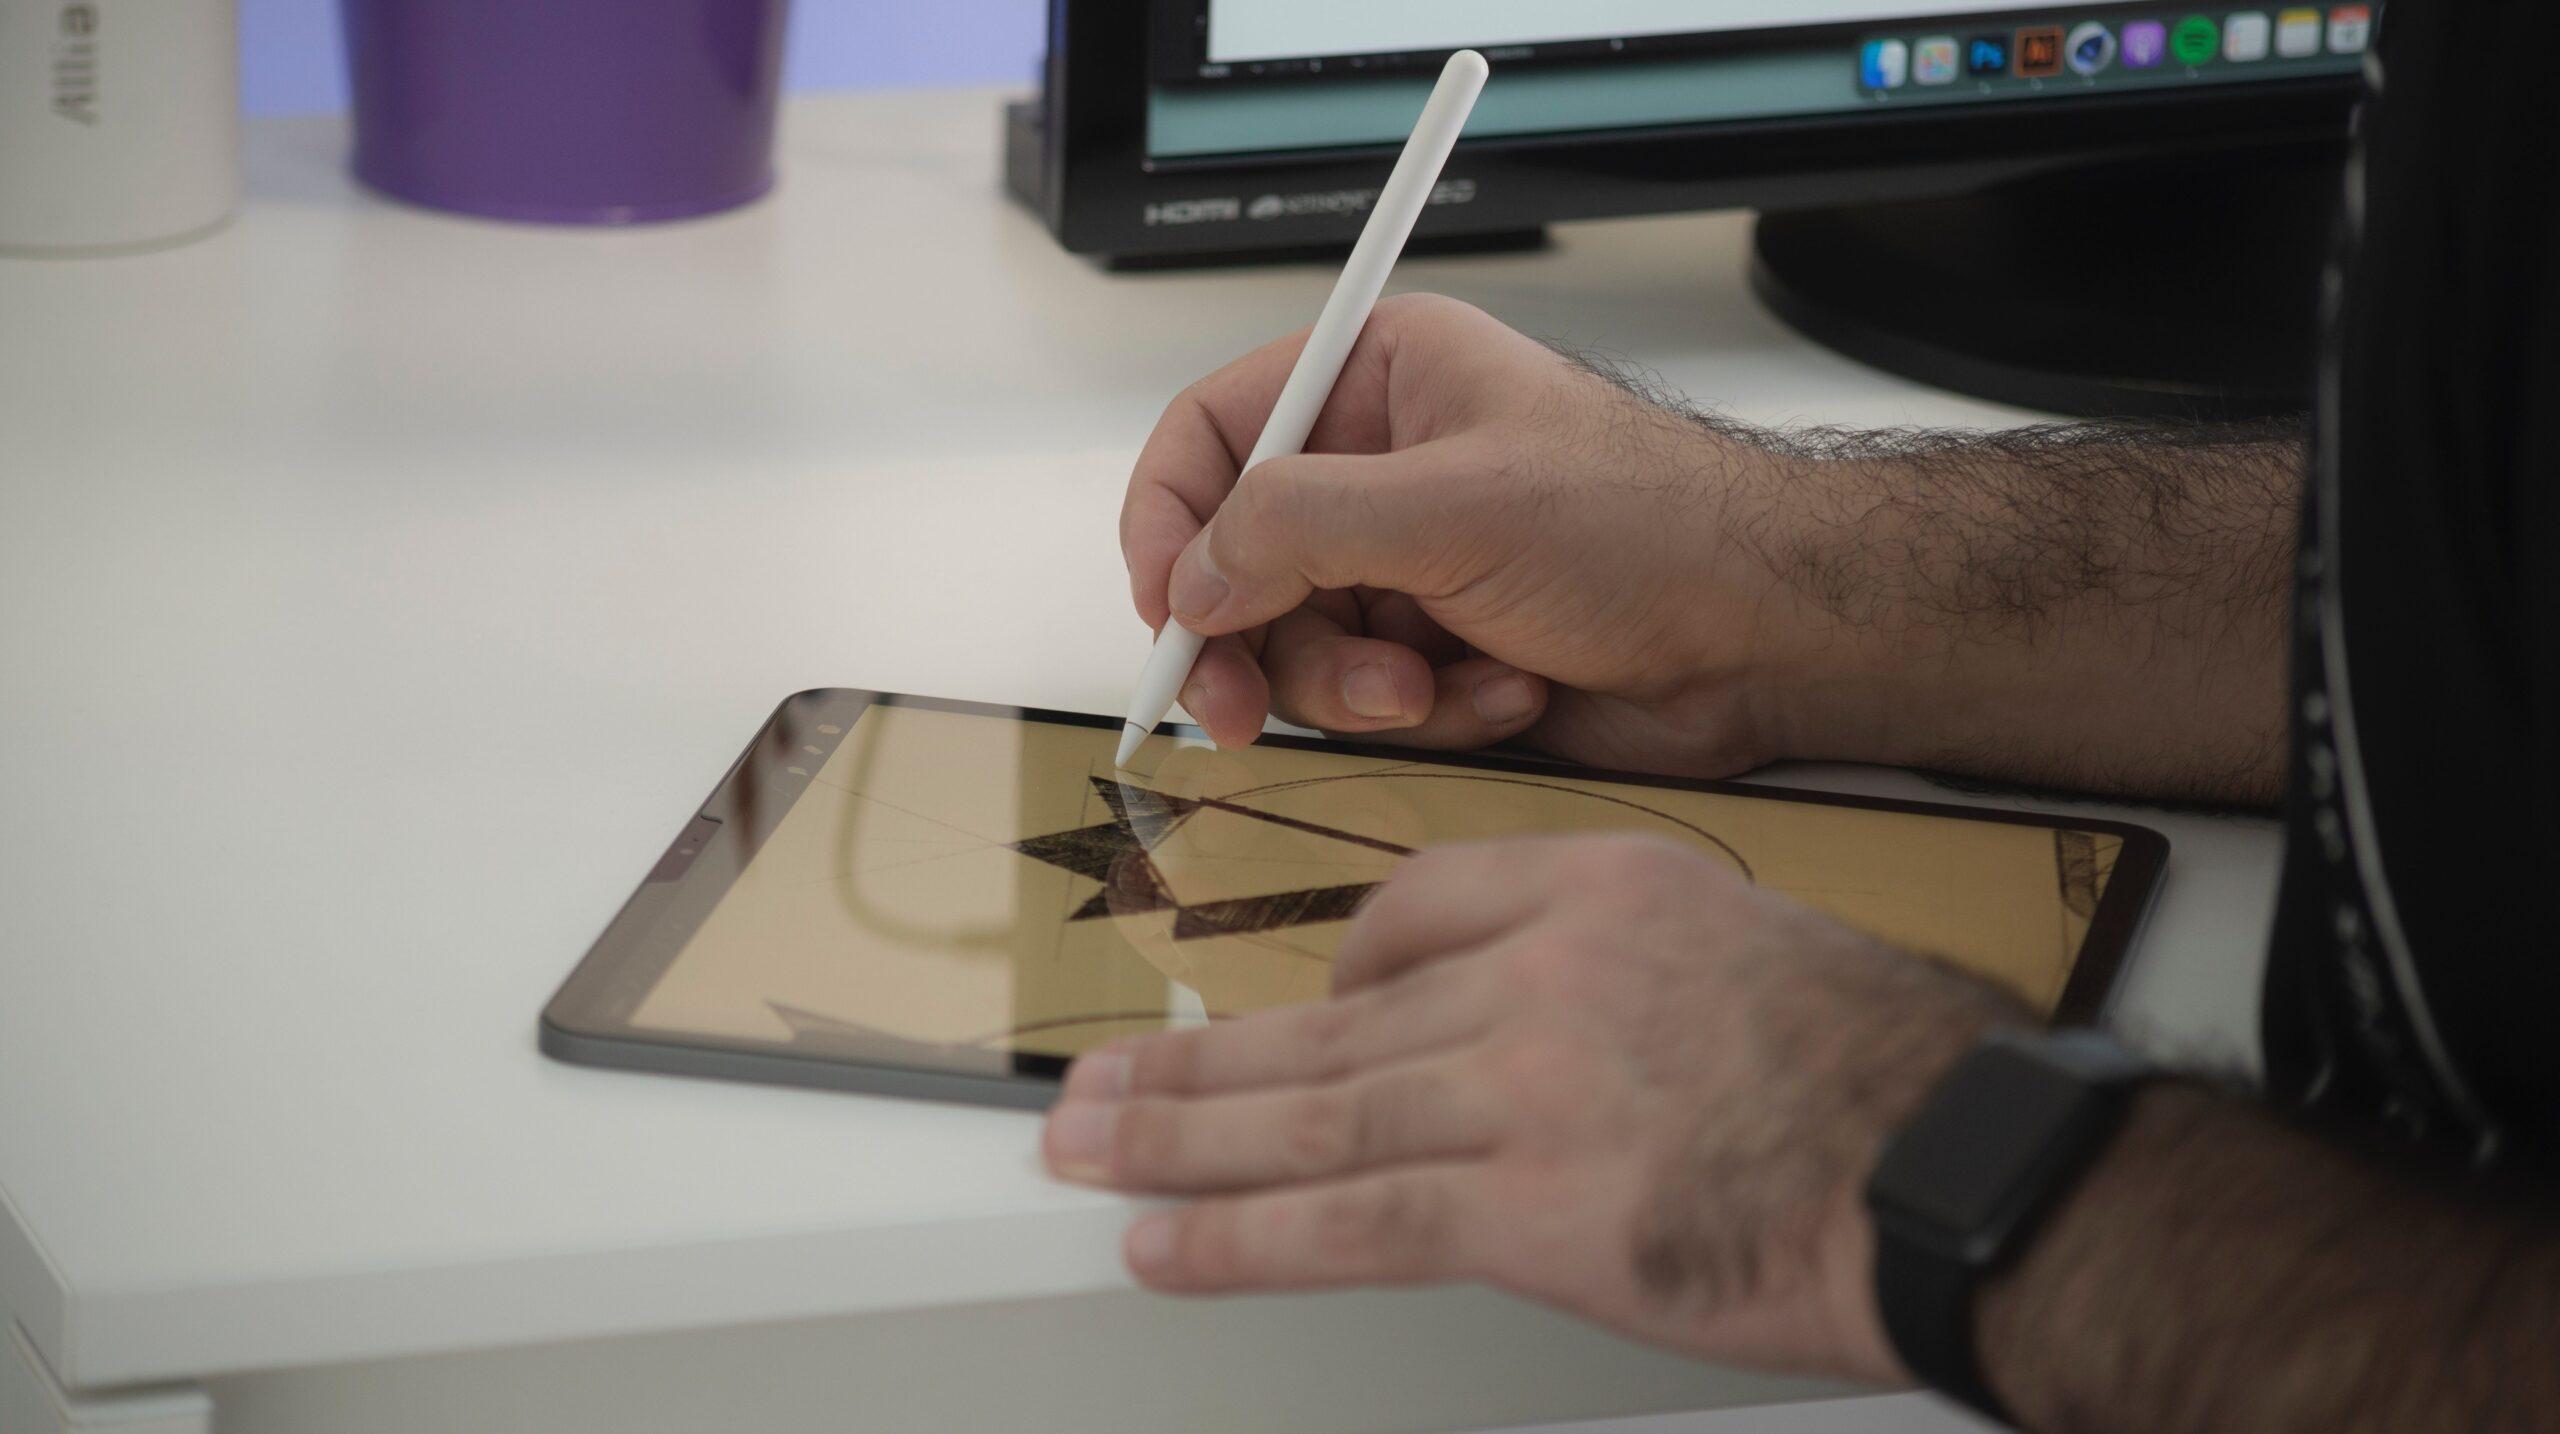 Close up of a person using a tablet to draw a logo or similar graphic.